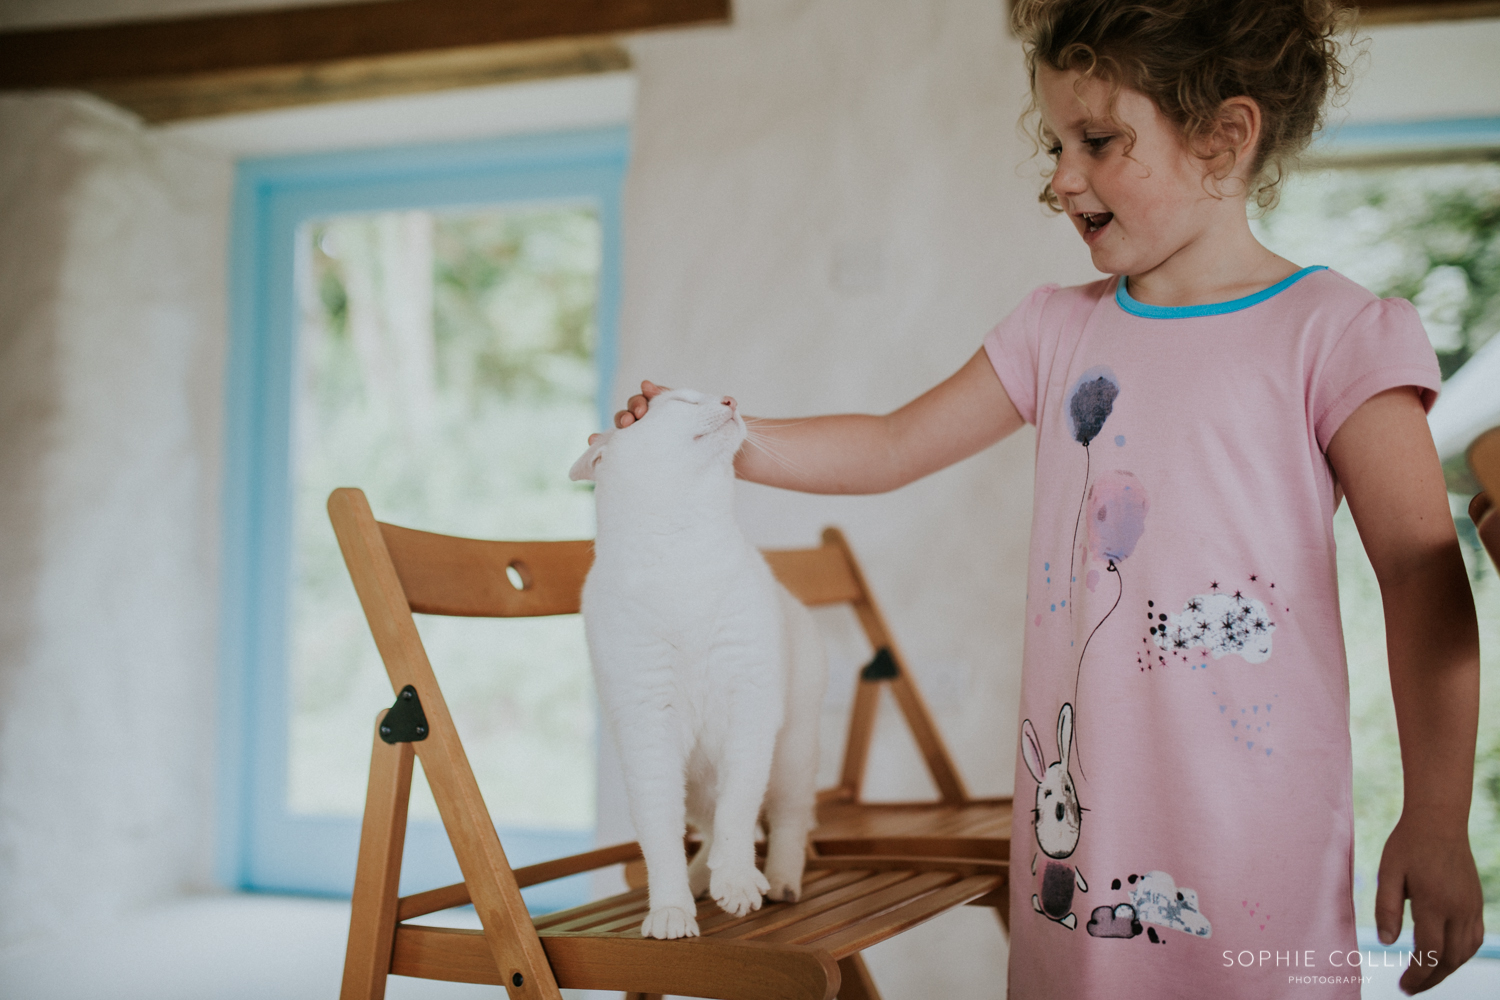 little girl and cat